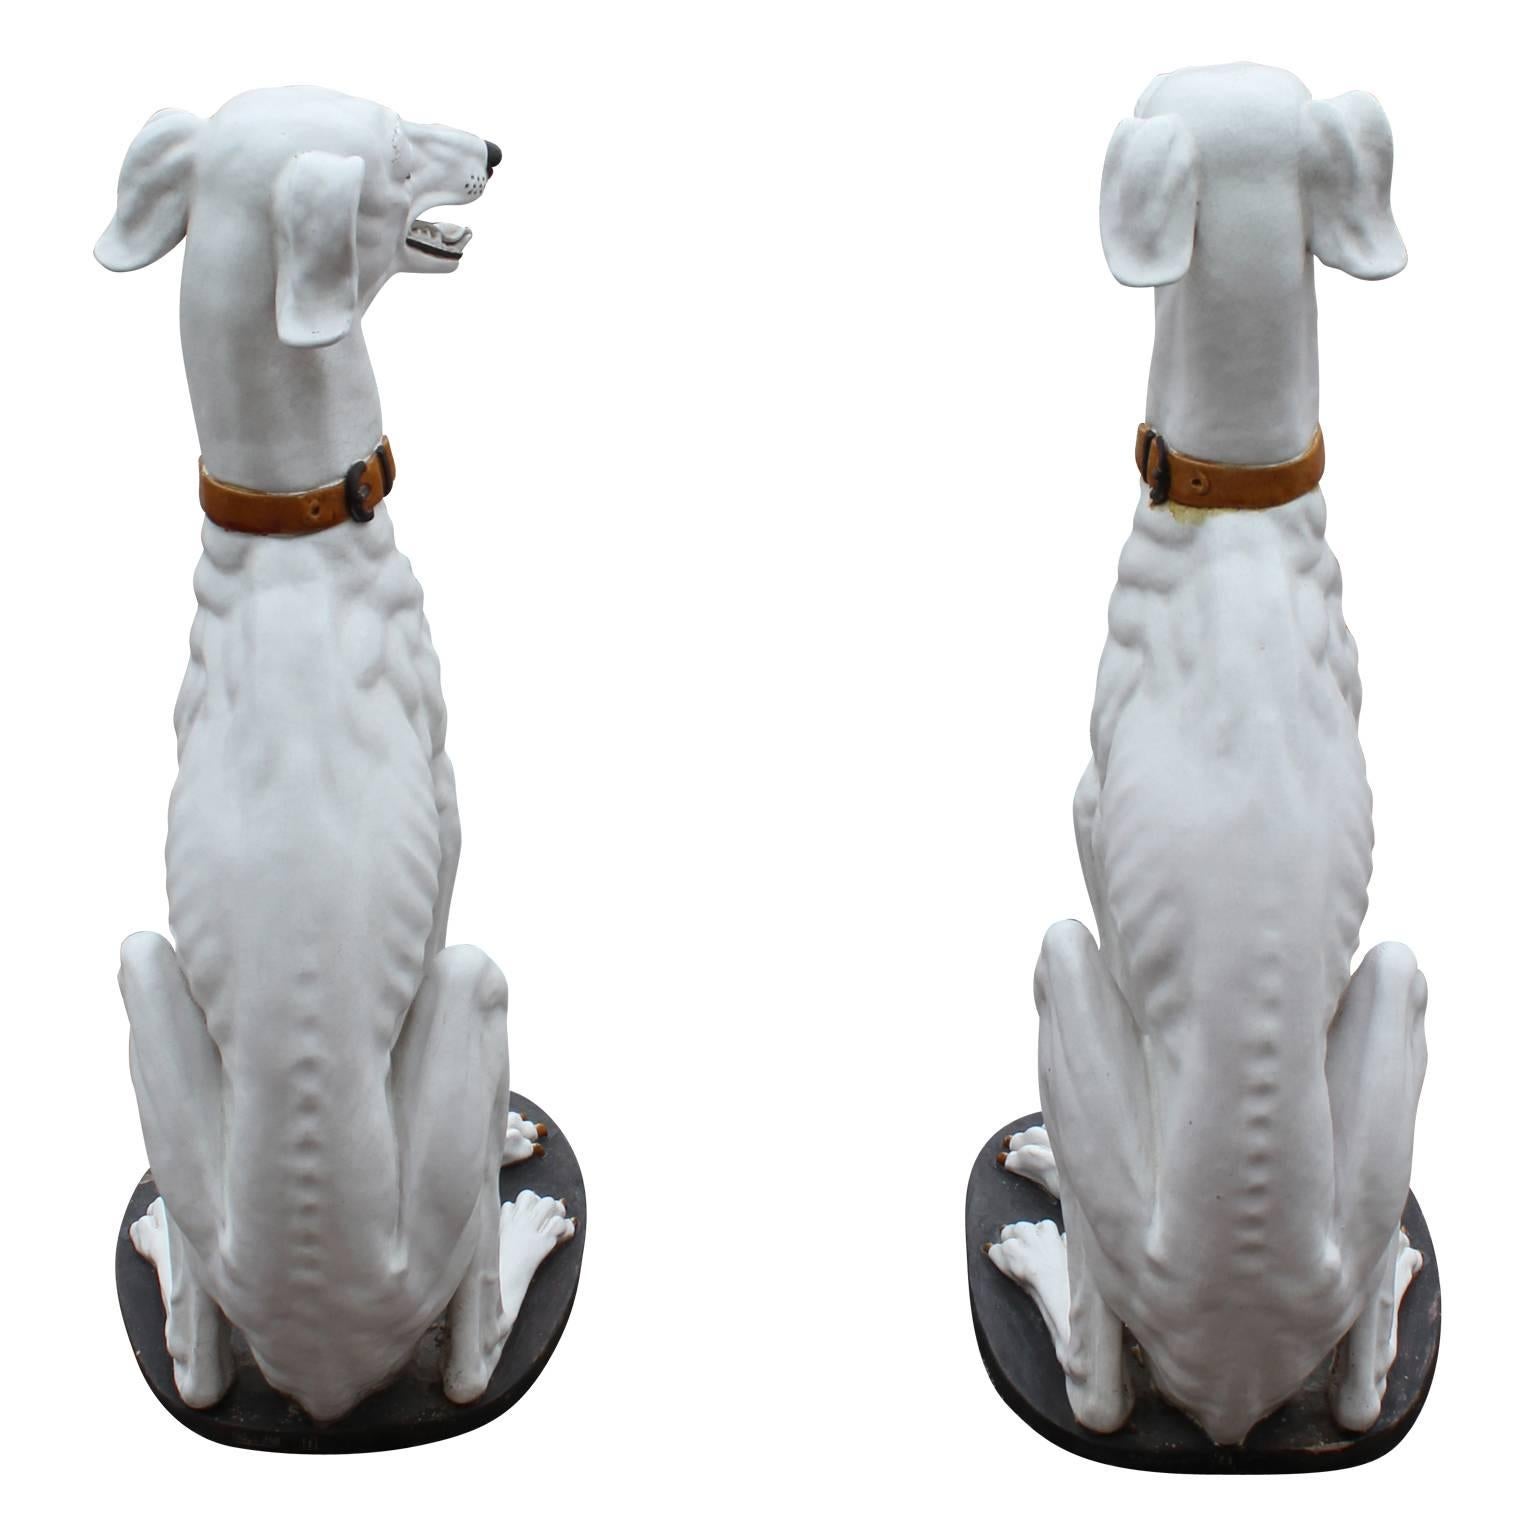 Pair of beautiful white ceramic greyhound dog statues made in Spain. Absolutely unique and gorgeous. Great fit to any space looking for an upscale touch.